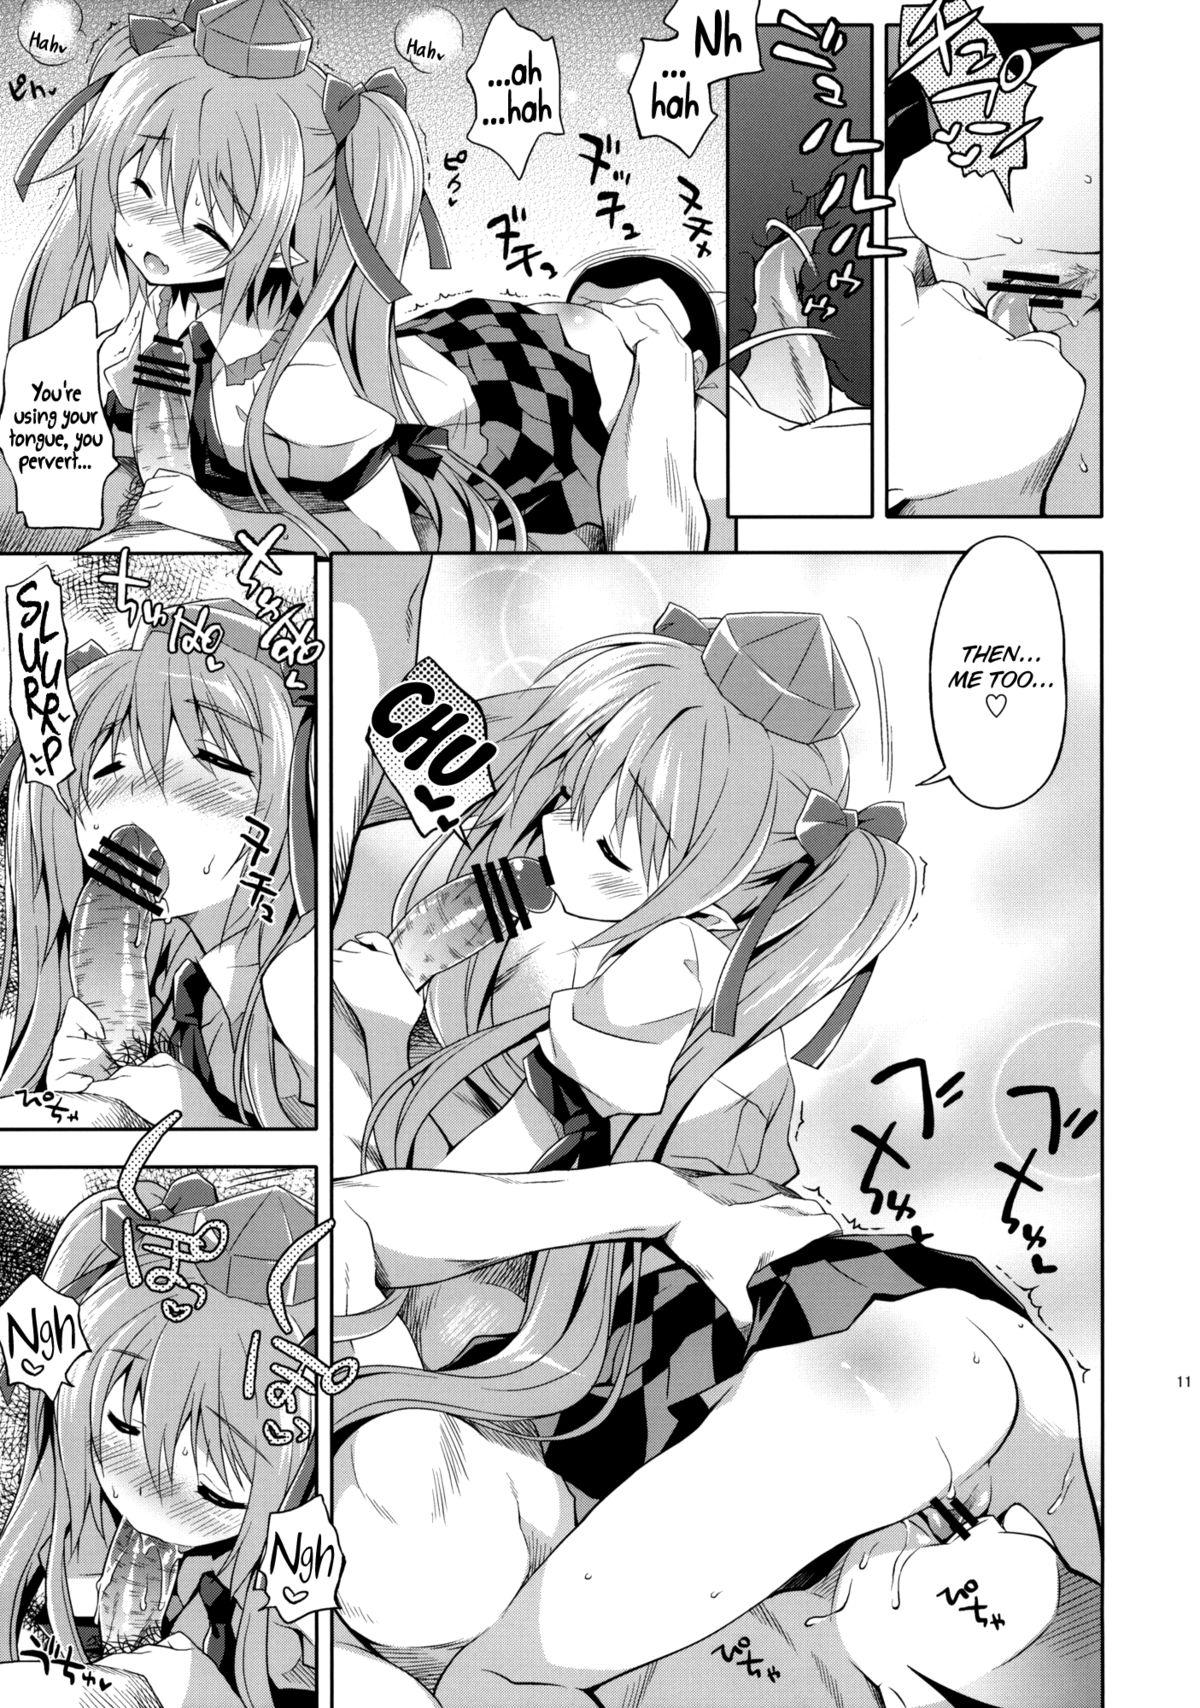 Assfuck Hatate no Binwan Shuzairoku | Record of Hatate's Competent Fact-Finding - Touhou project Real Orgasms - Page 10